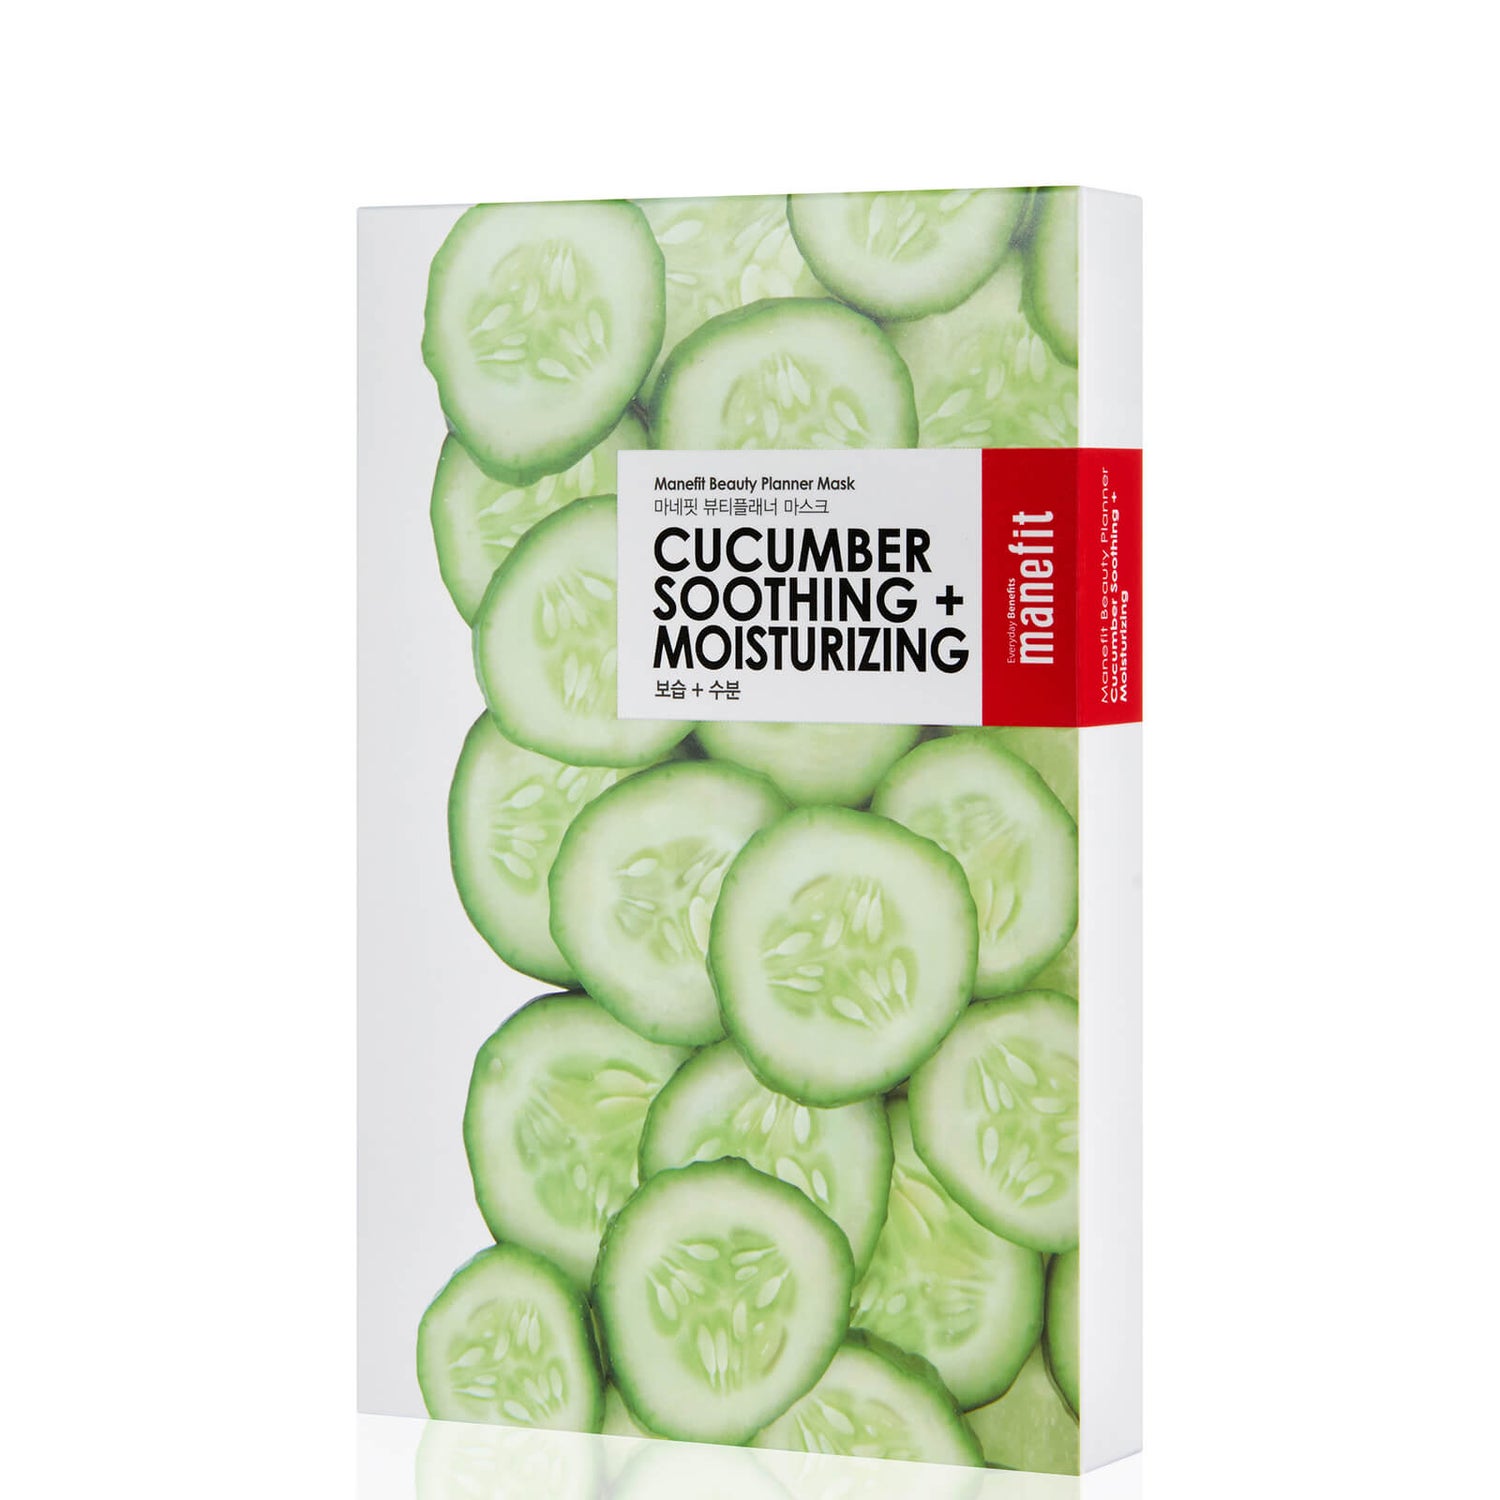 Manefit Beauty Planner Cucumber Soothing + Moisturizing Mask (Box of 5)